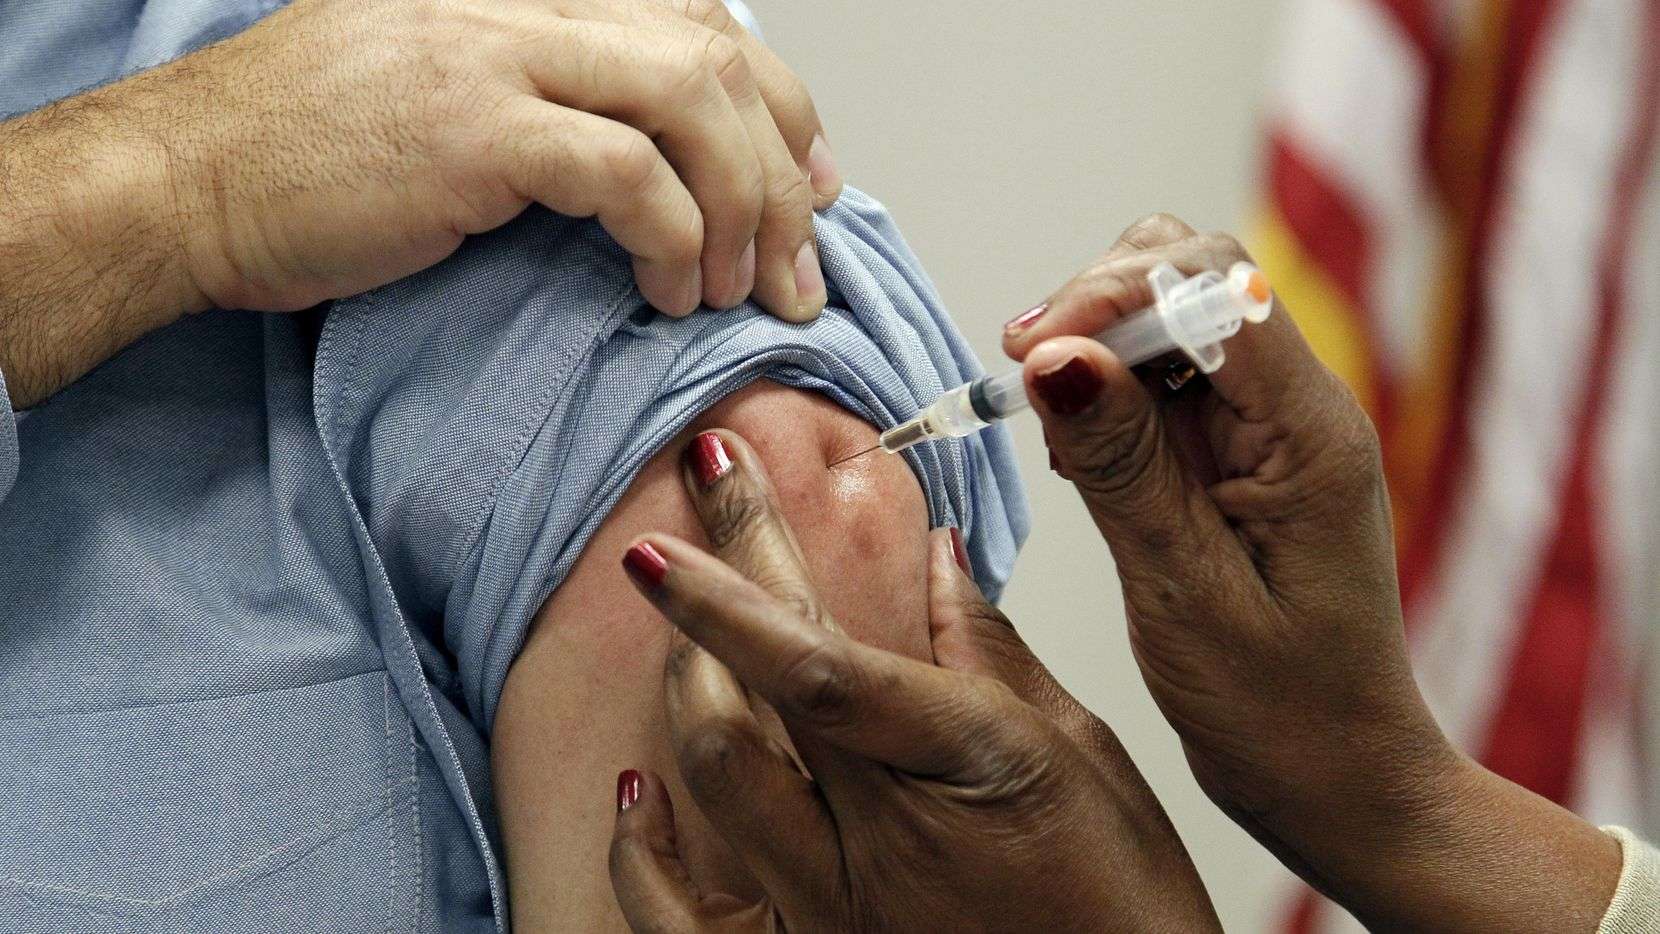 Lewisville ISD offers flu vaccinations to public